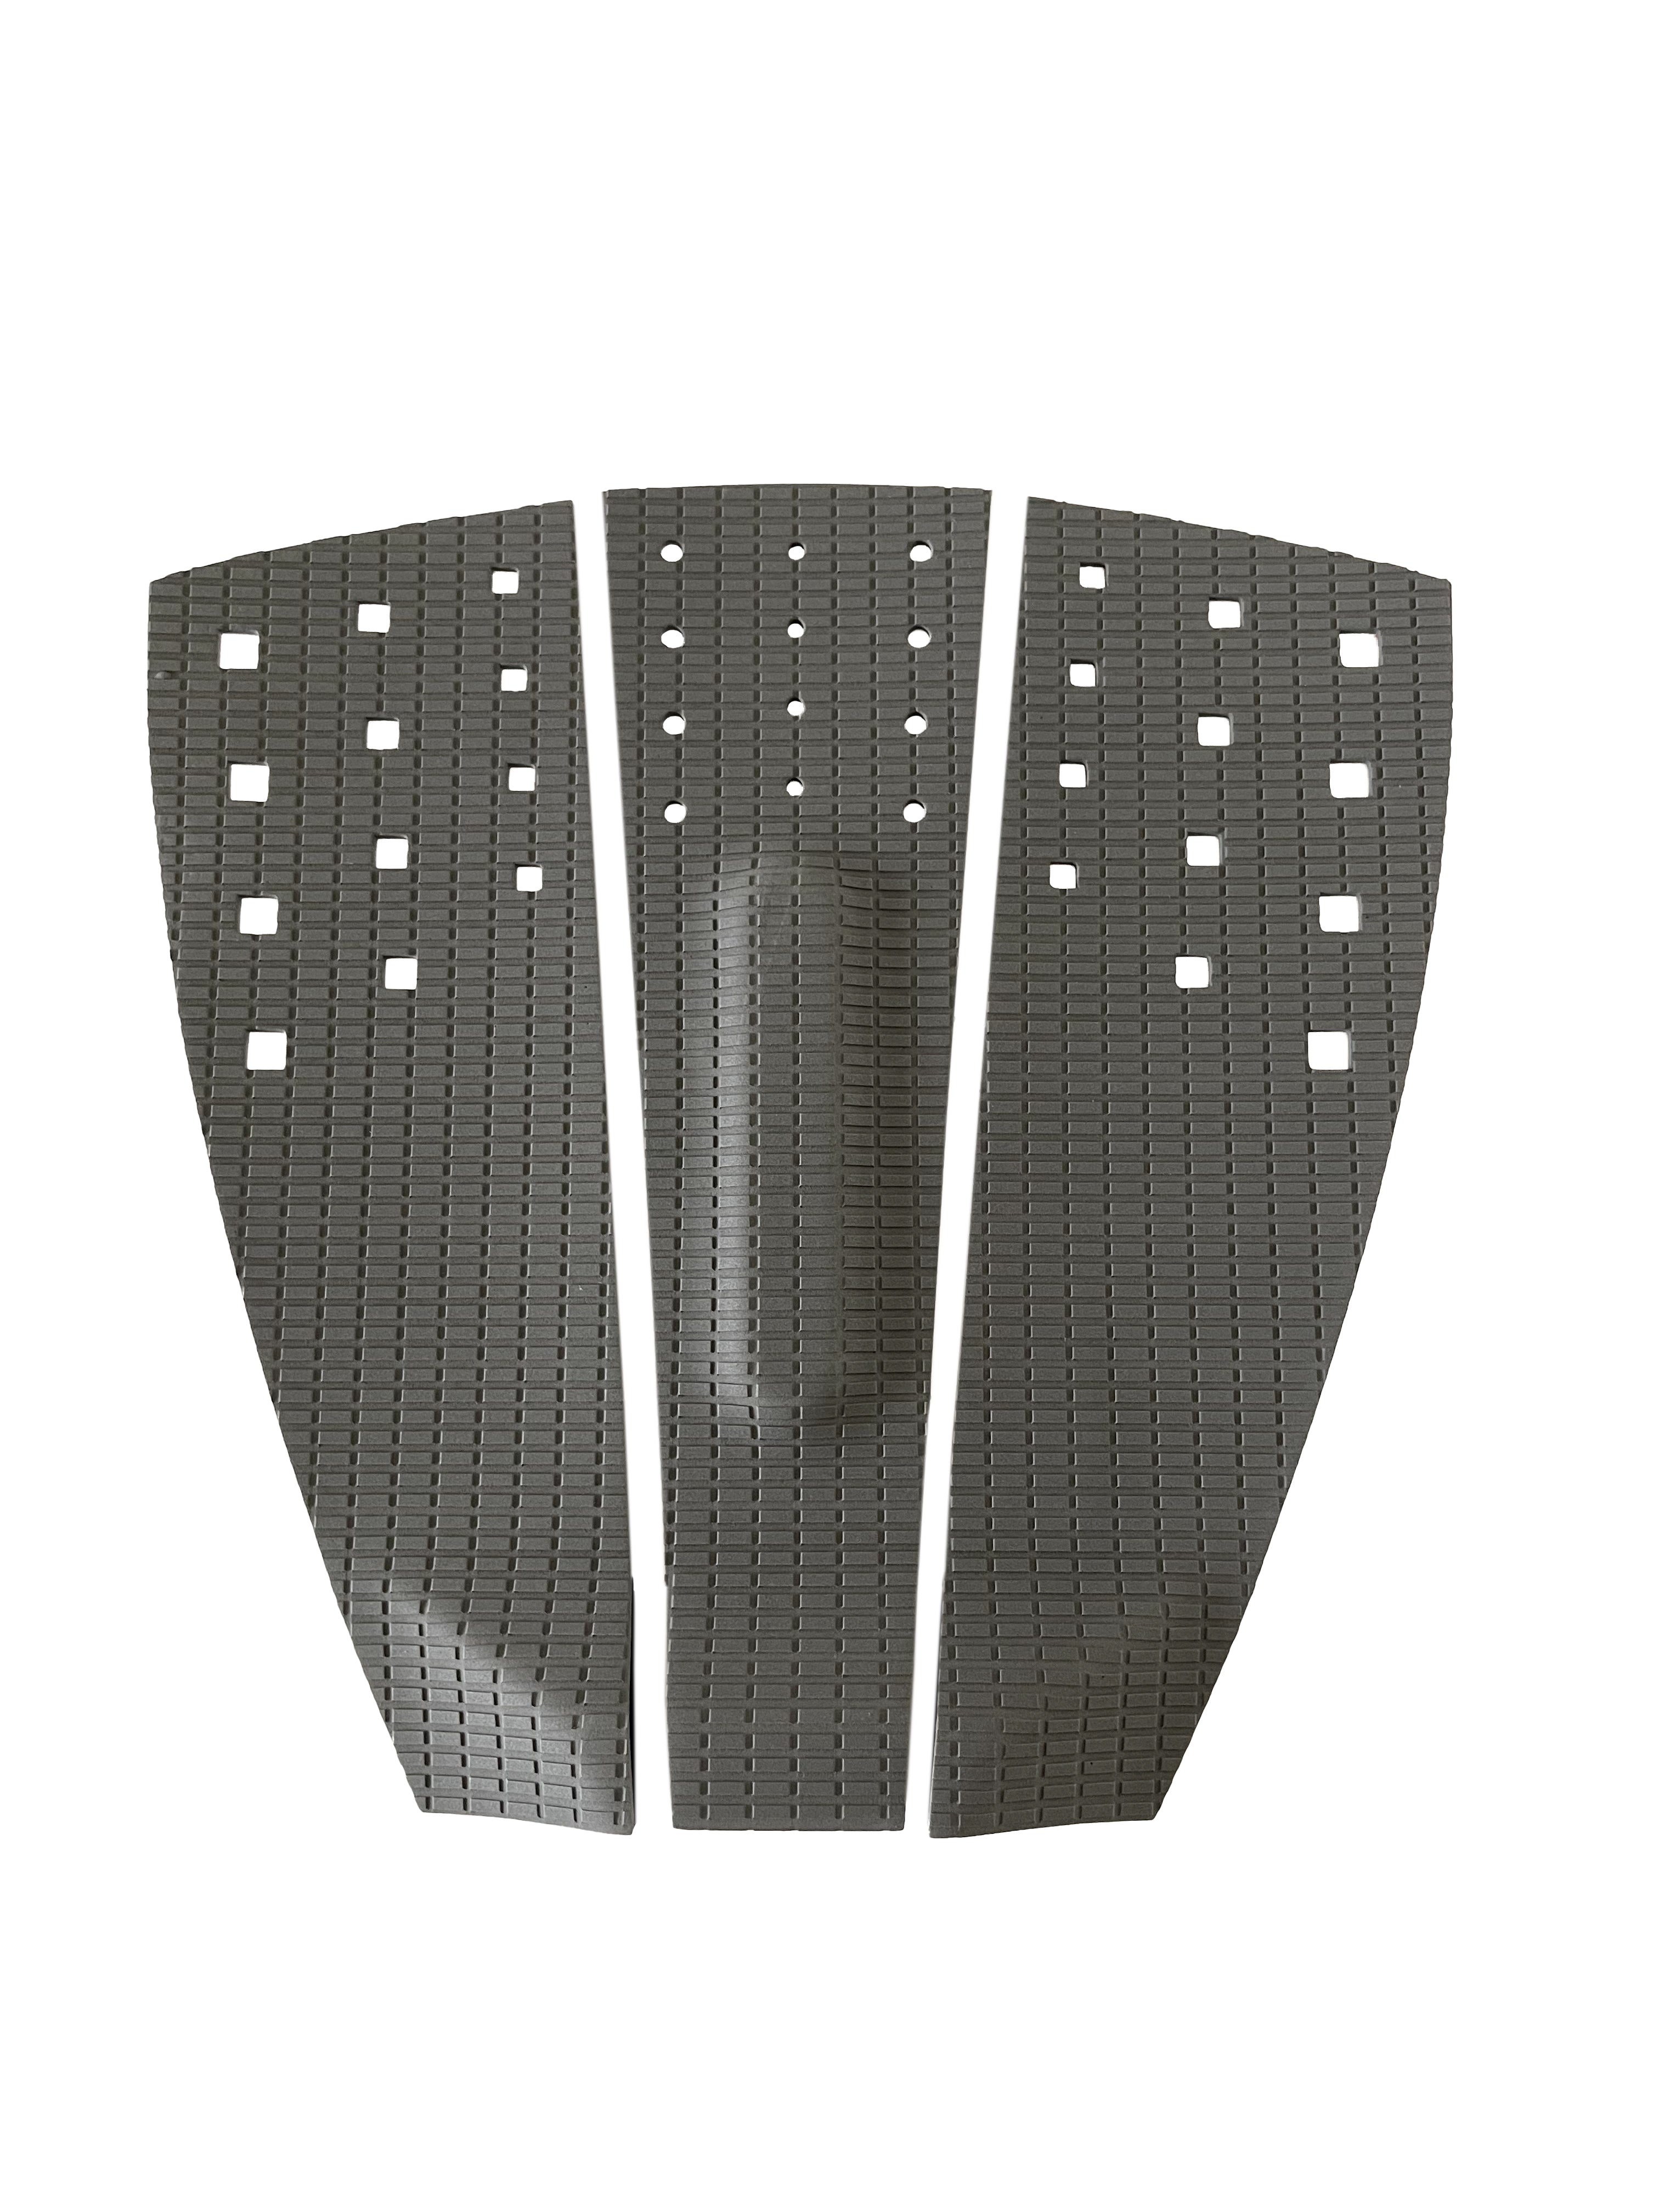 Firewire 3 Piece Lowrider Arch Traction Pad